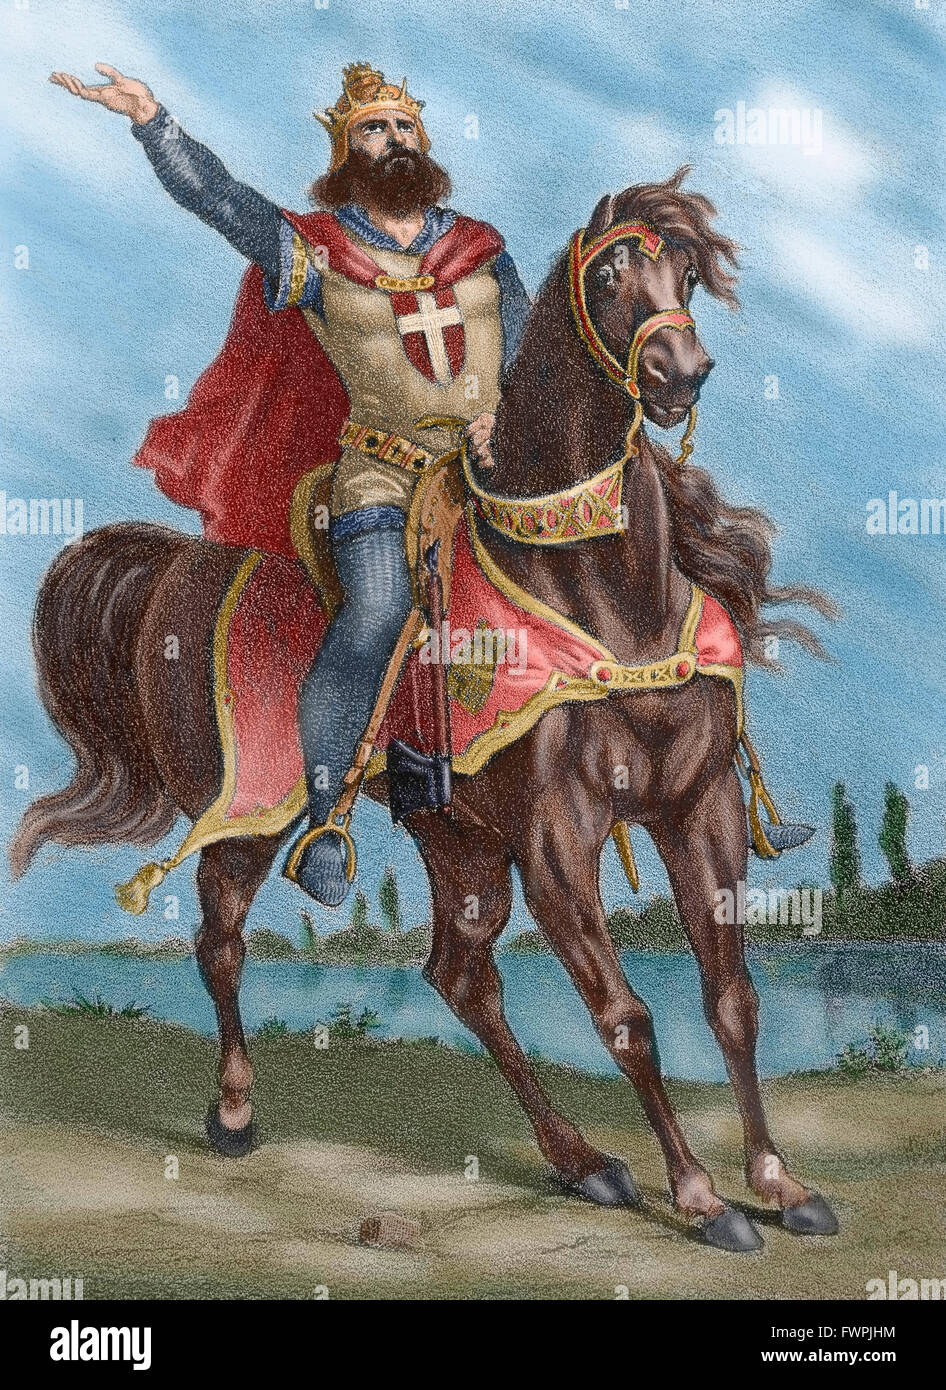 Ferdinand III (c.1201-1252), called Ferdinand the Saint. King of Castile and Leon. Ferdinand III on horseback. Engraving in Spain Illustrated History by R. del Castillo, 19th century. Colored. Stock Photo